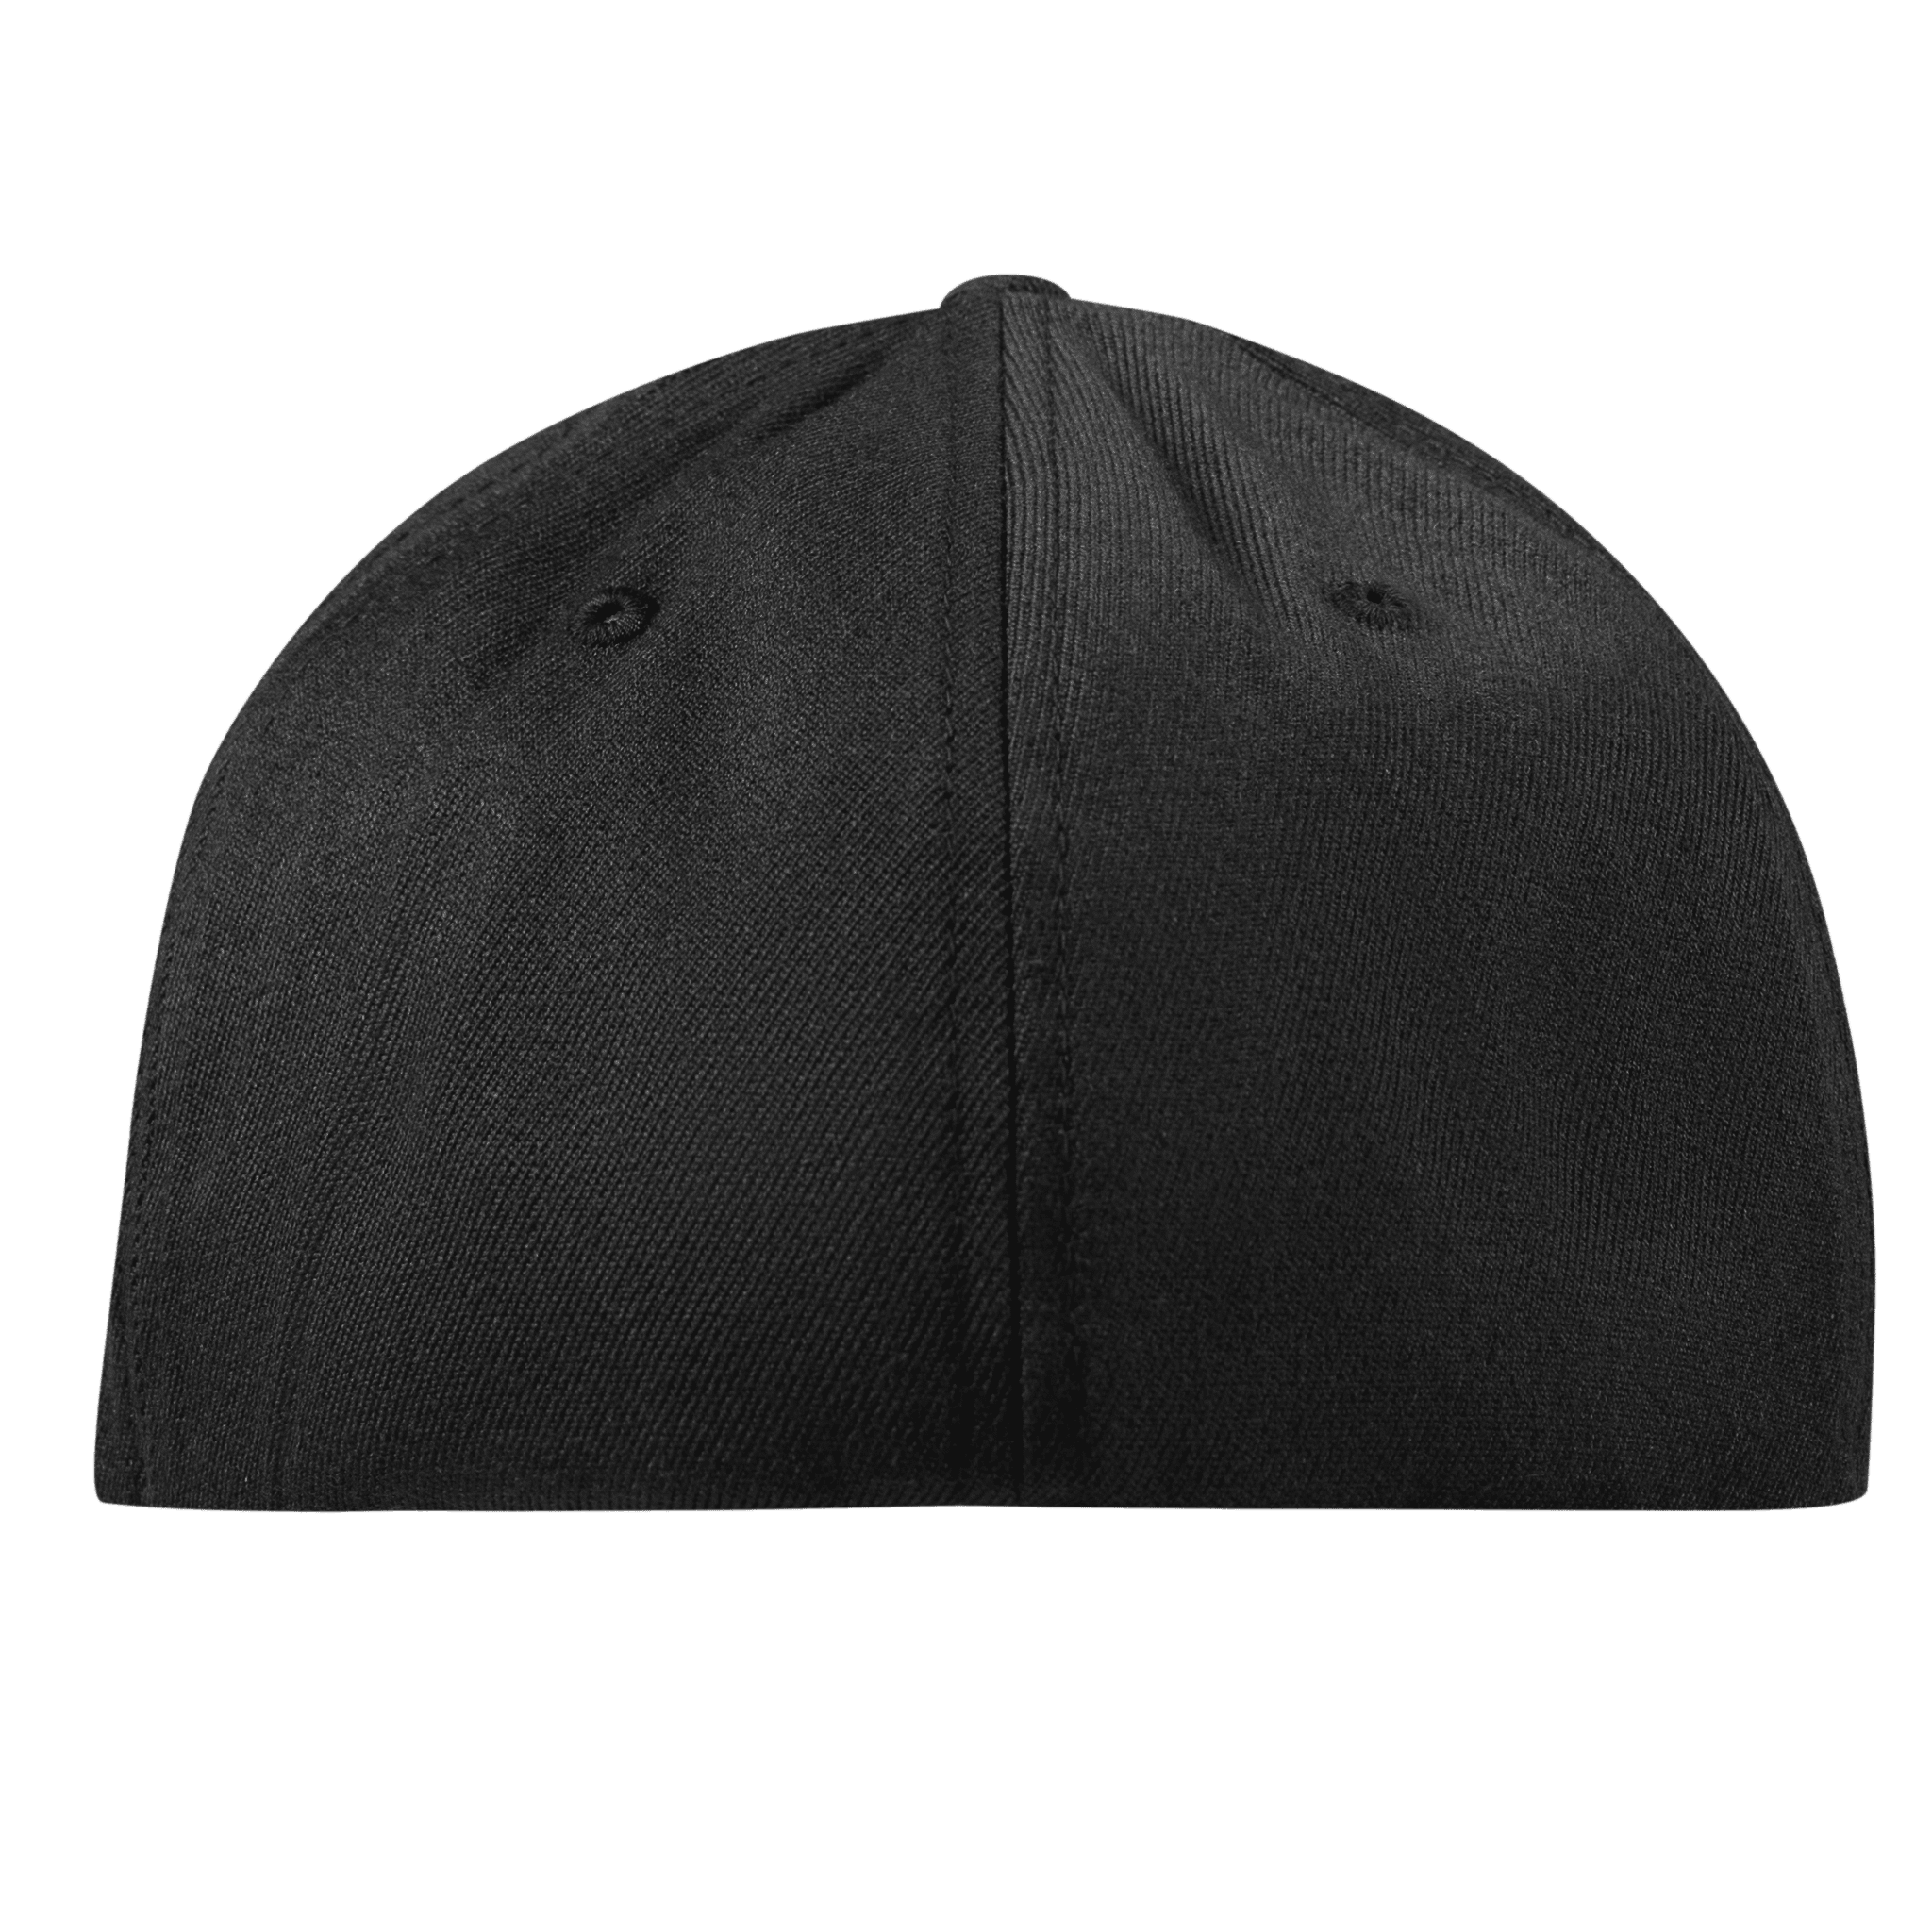 California Compass Flexfit Fitted Back Black